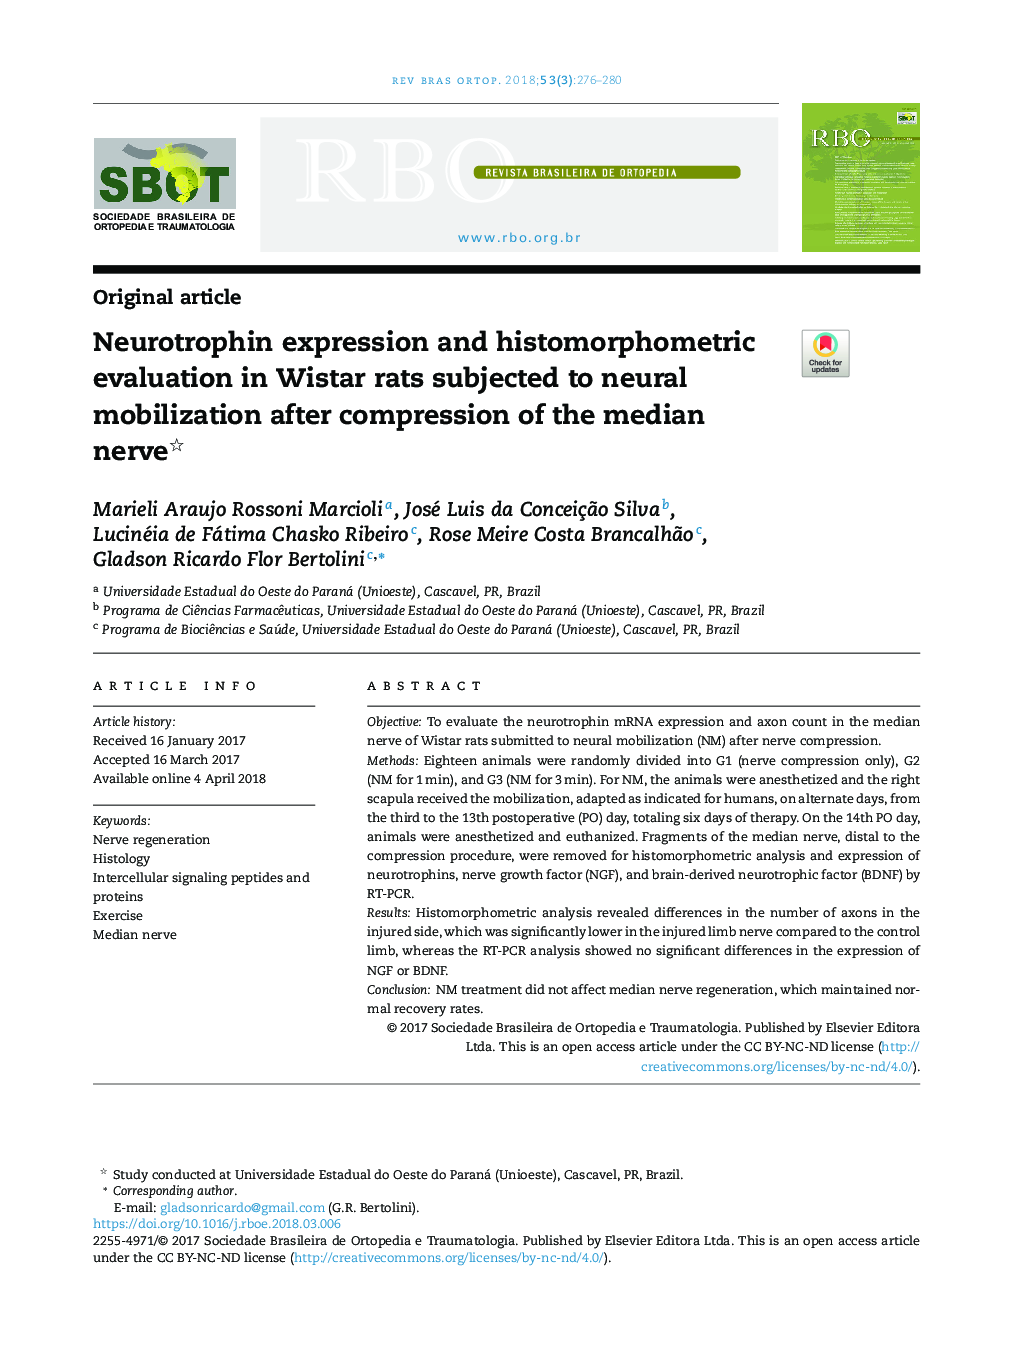 Neurotrophin expression and histomorphometric evaluation in Wistar rats subjected to neural mobilization after compression of the median nerve